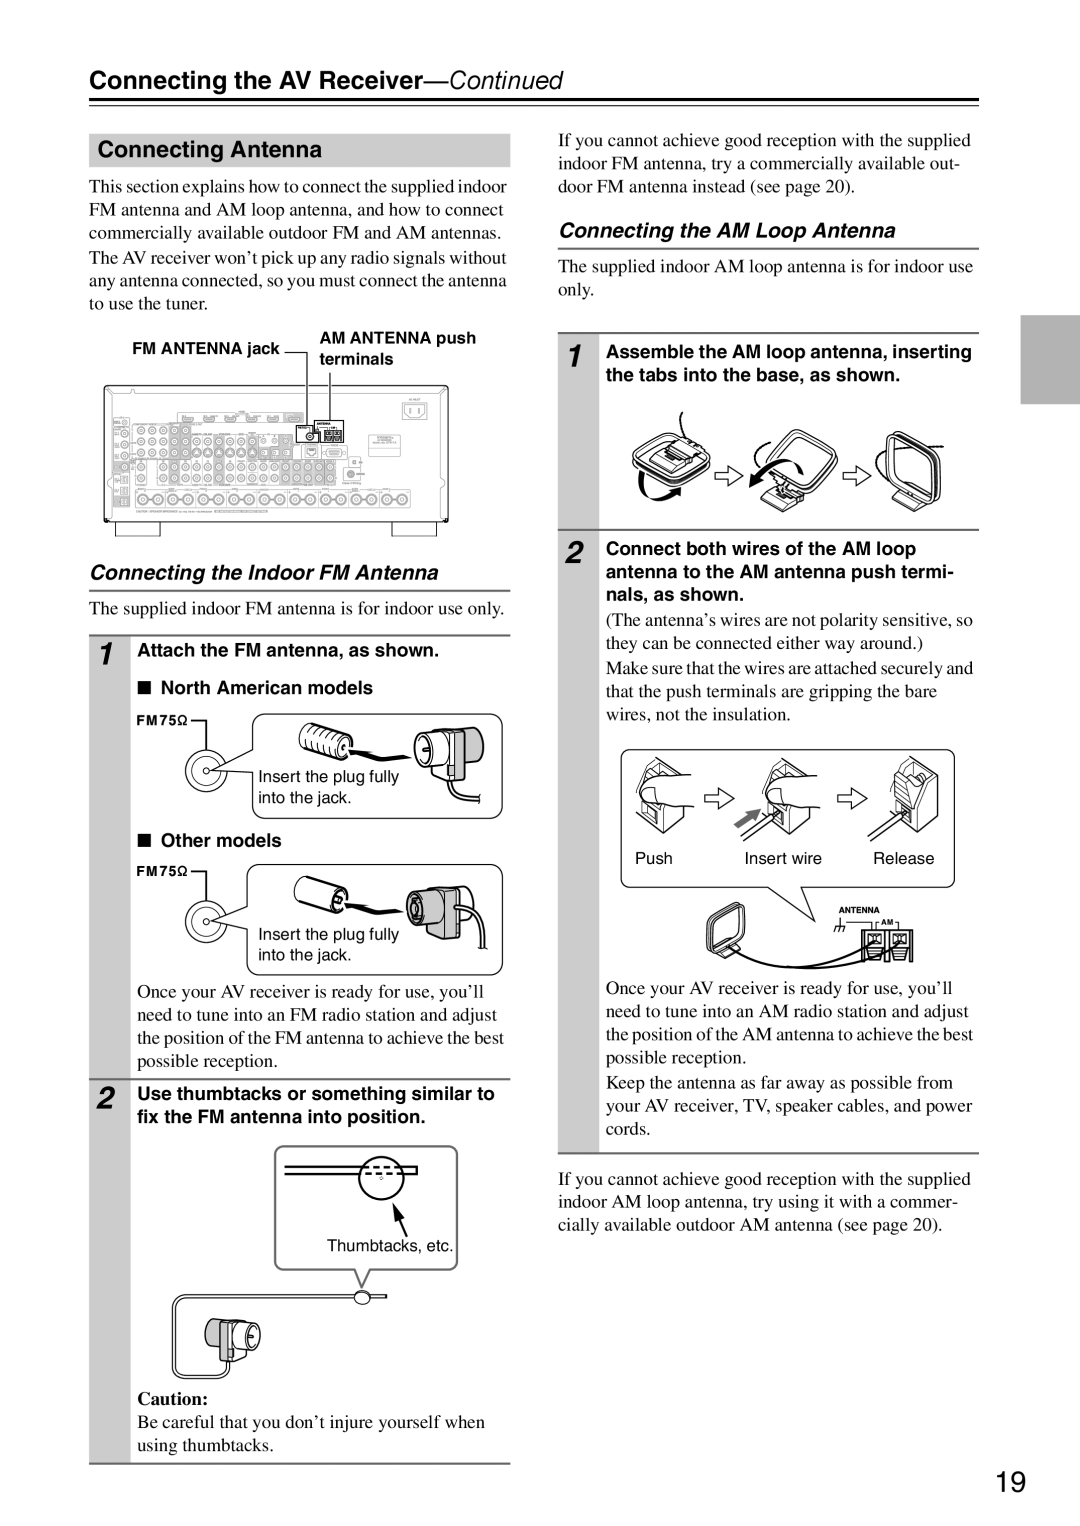 Onkyo DTR-7.9 instruction manual Connecting Antenna, Connecting the AM Loop Antenna, Connecting the Indoor FM Antenna 